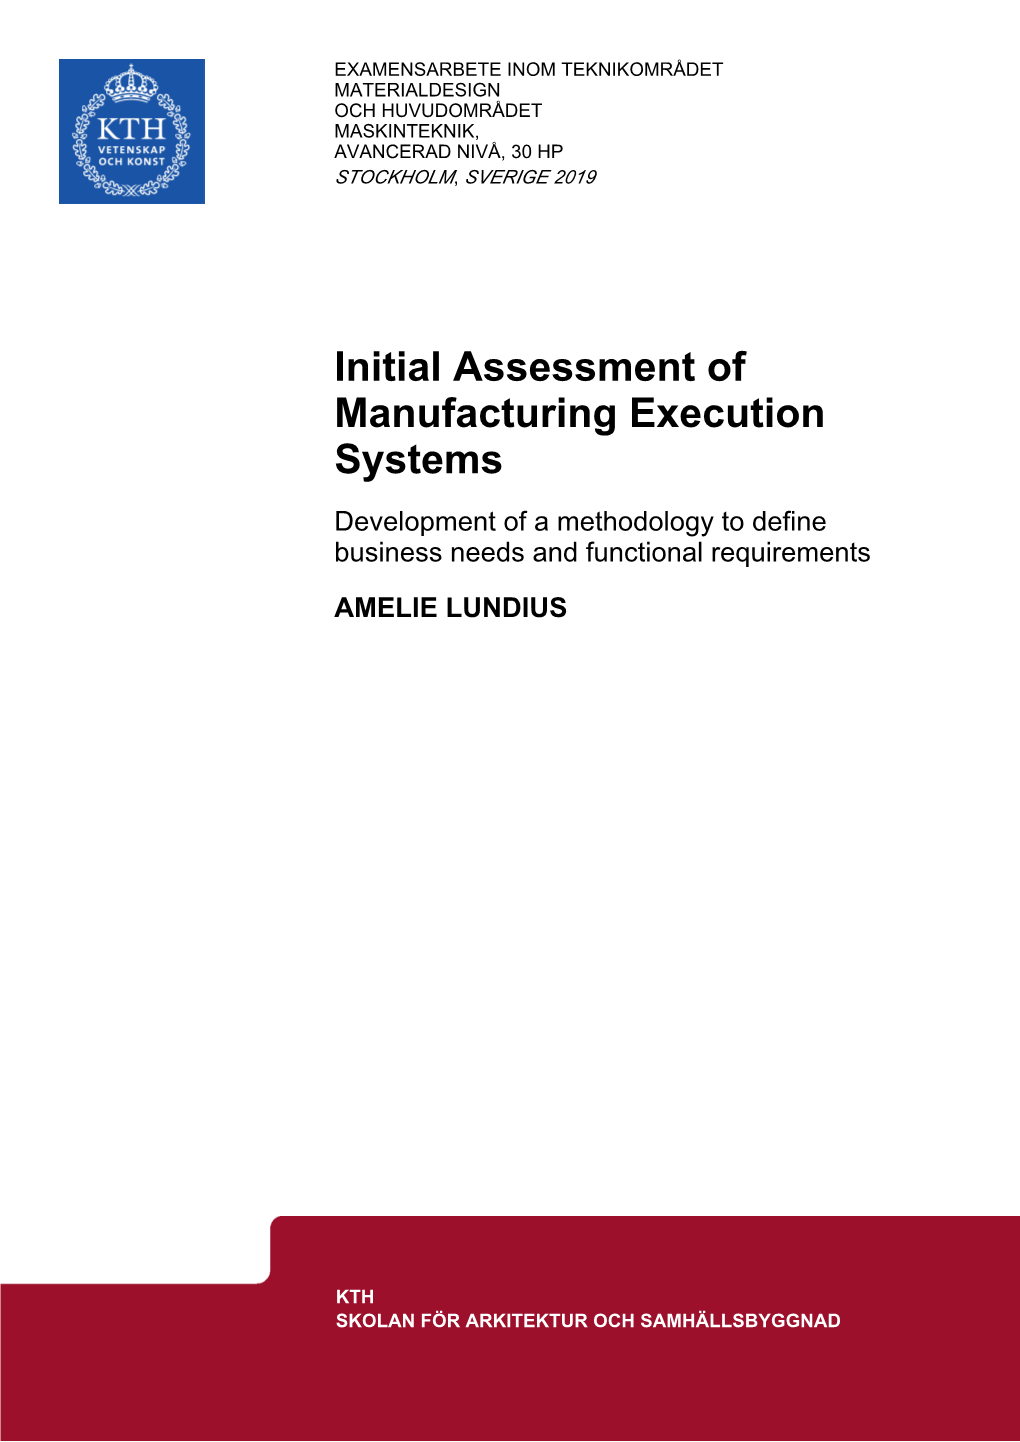 Initial Assessment of Manufacturing Execution Systems Development of a Methodology to Define Business Needs and Functional Requirements